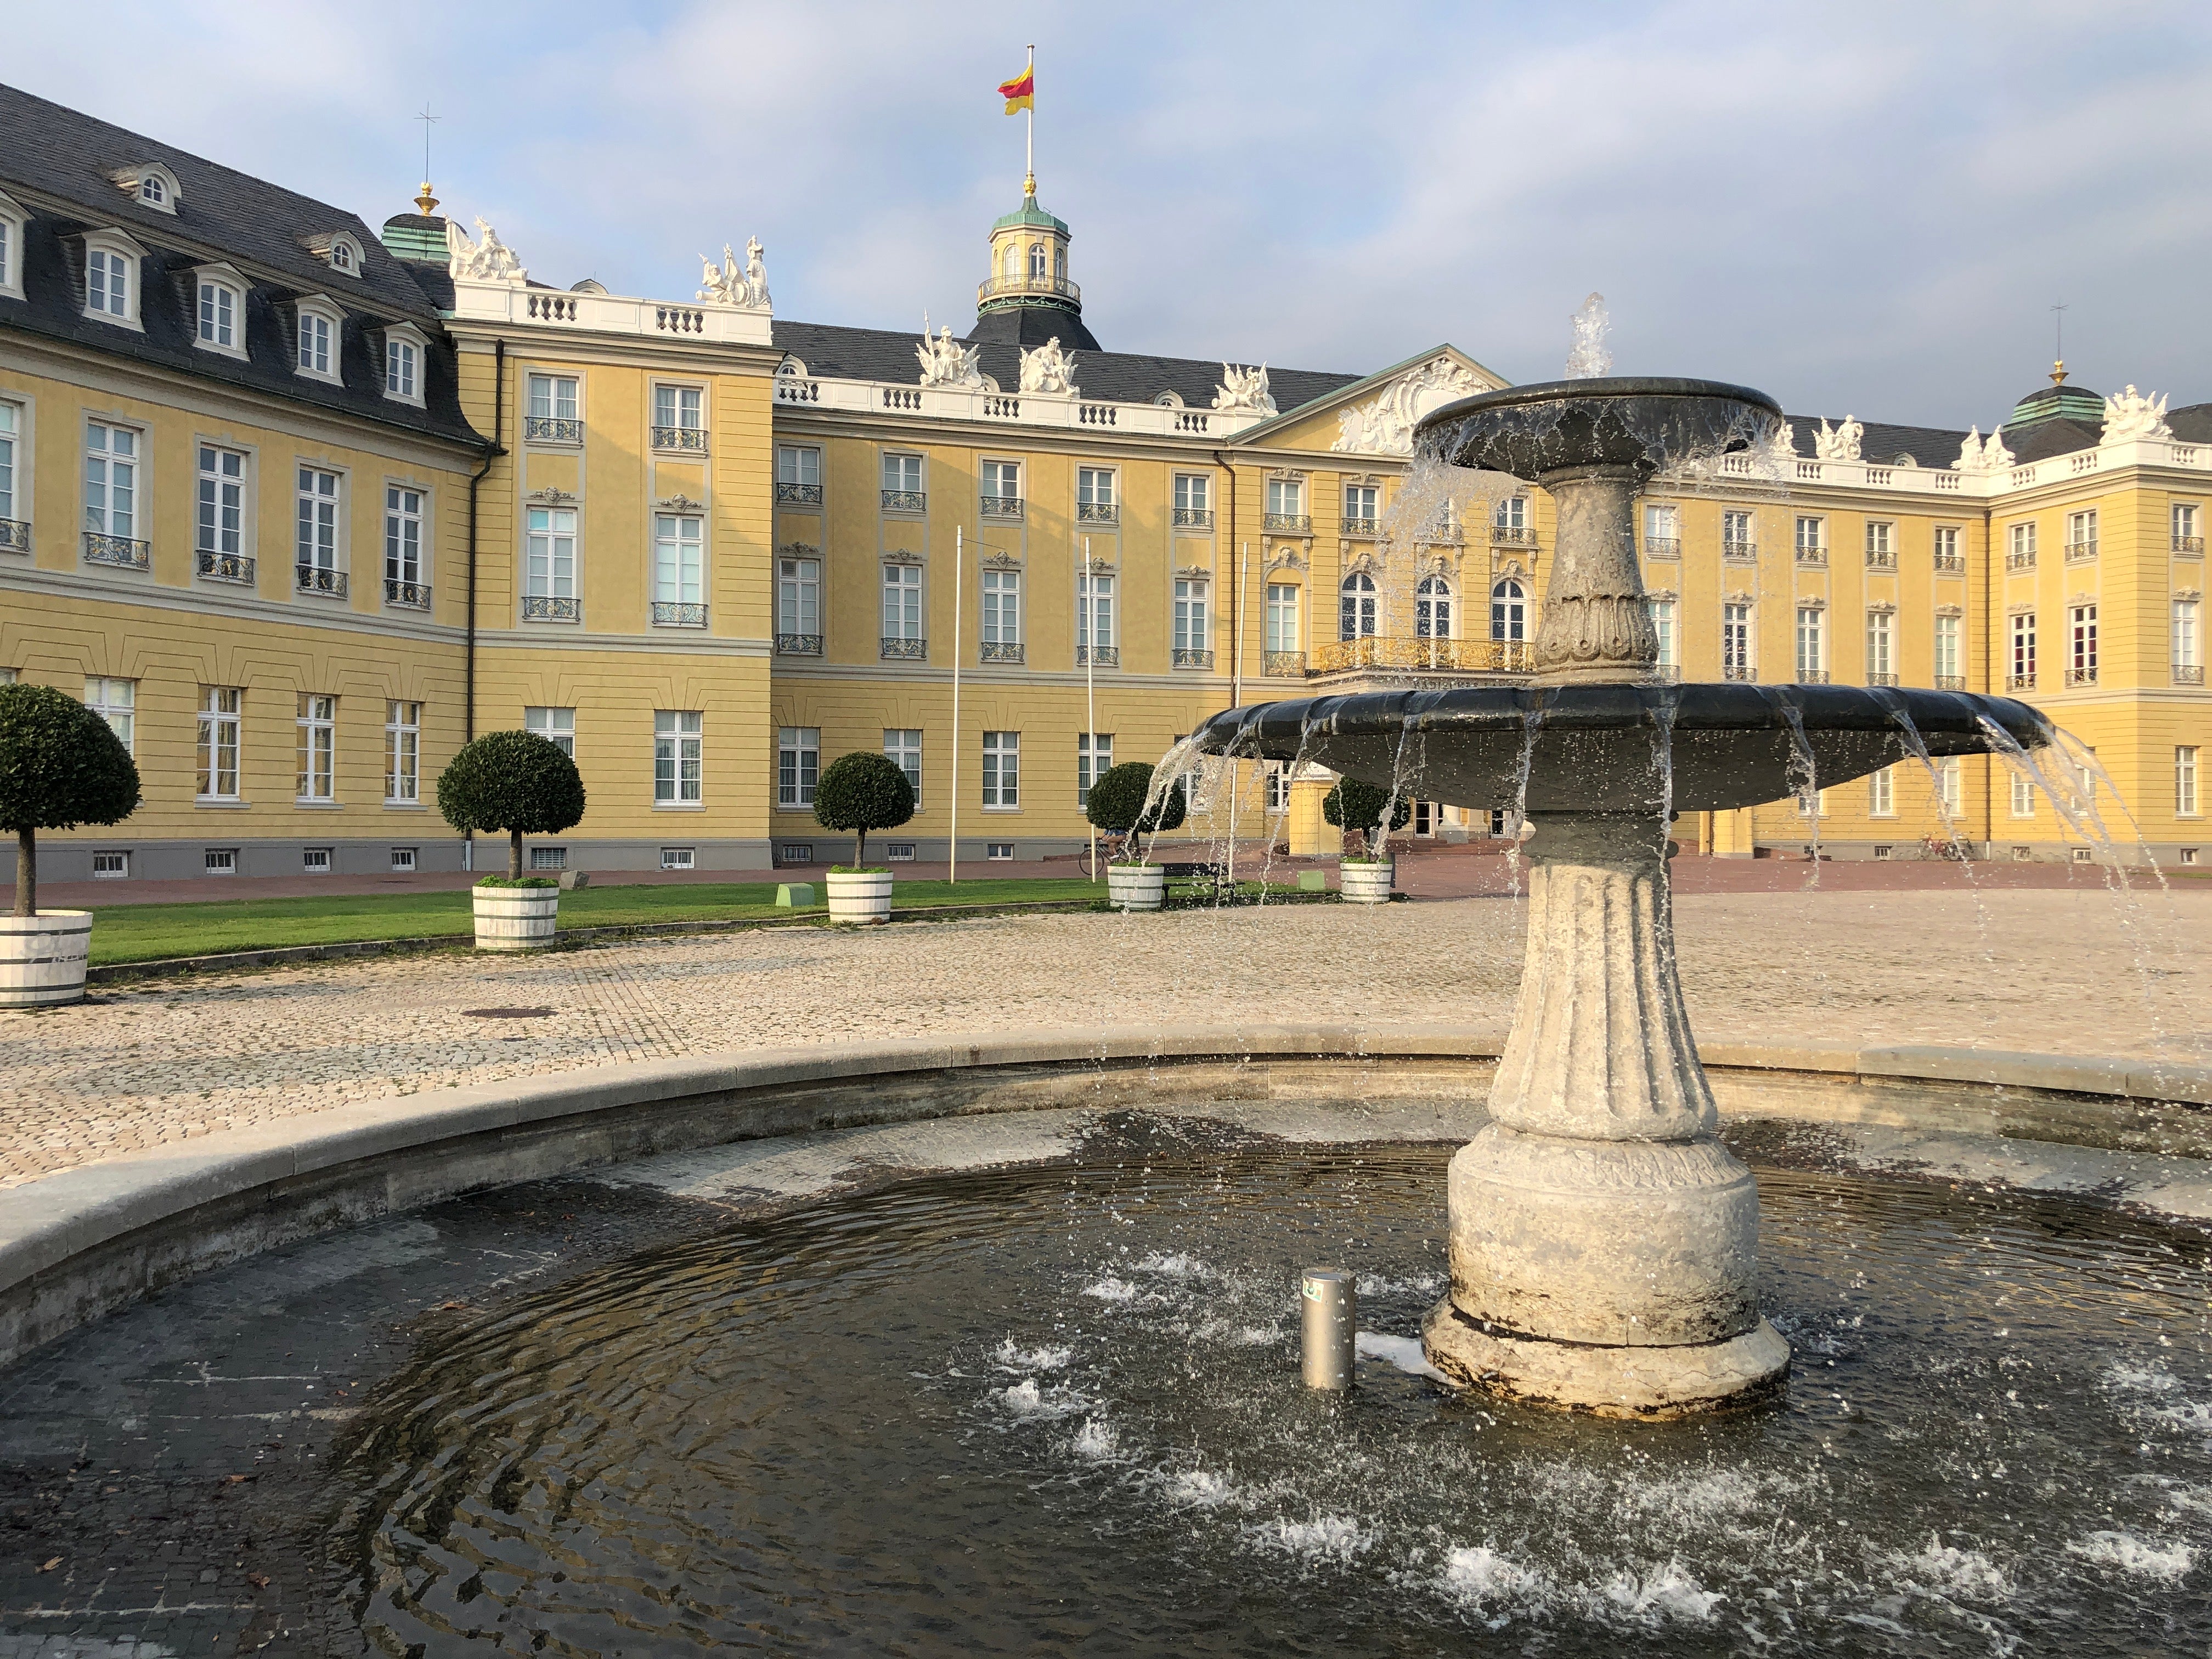 Distant dream: the palace at the heart of Karlsruhe in southwest Germany